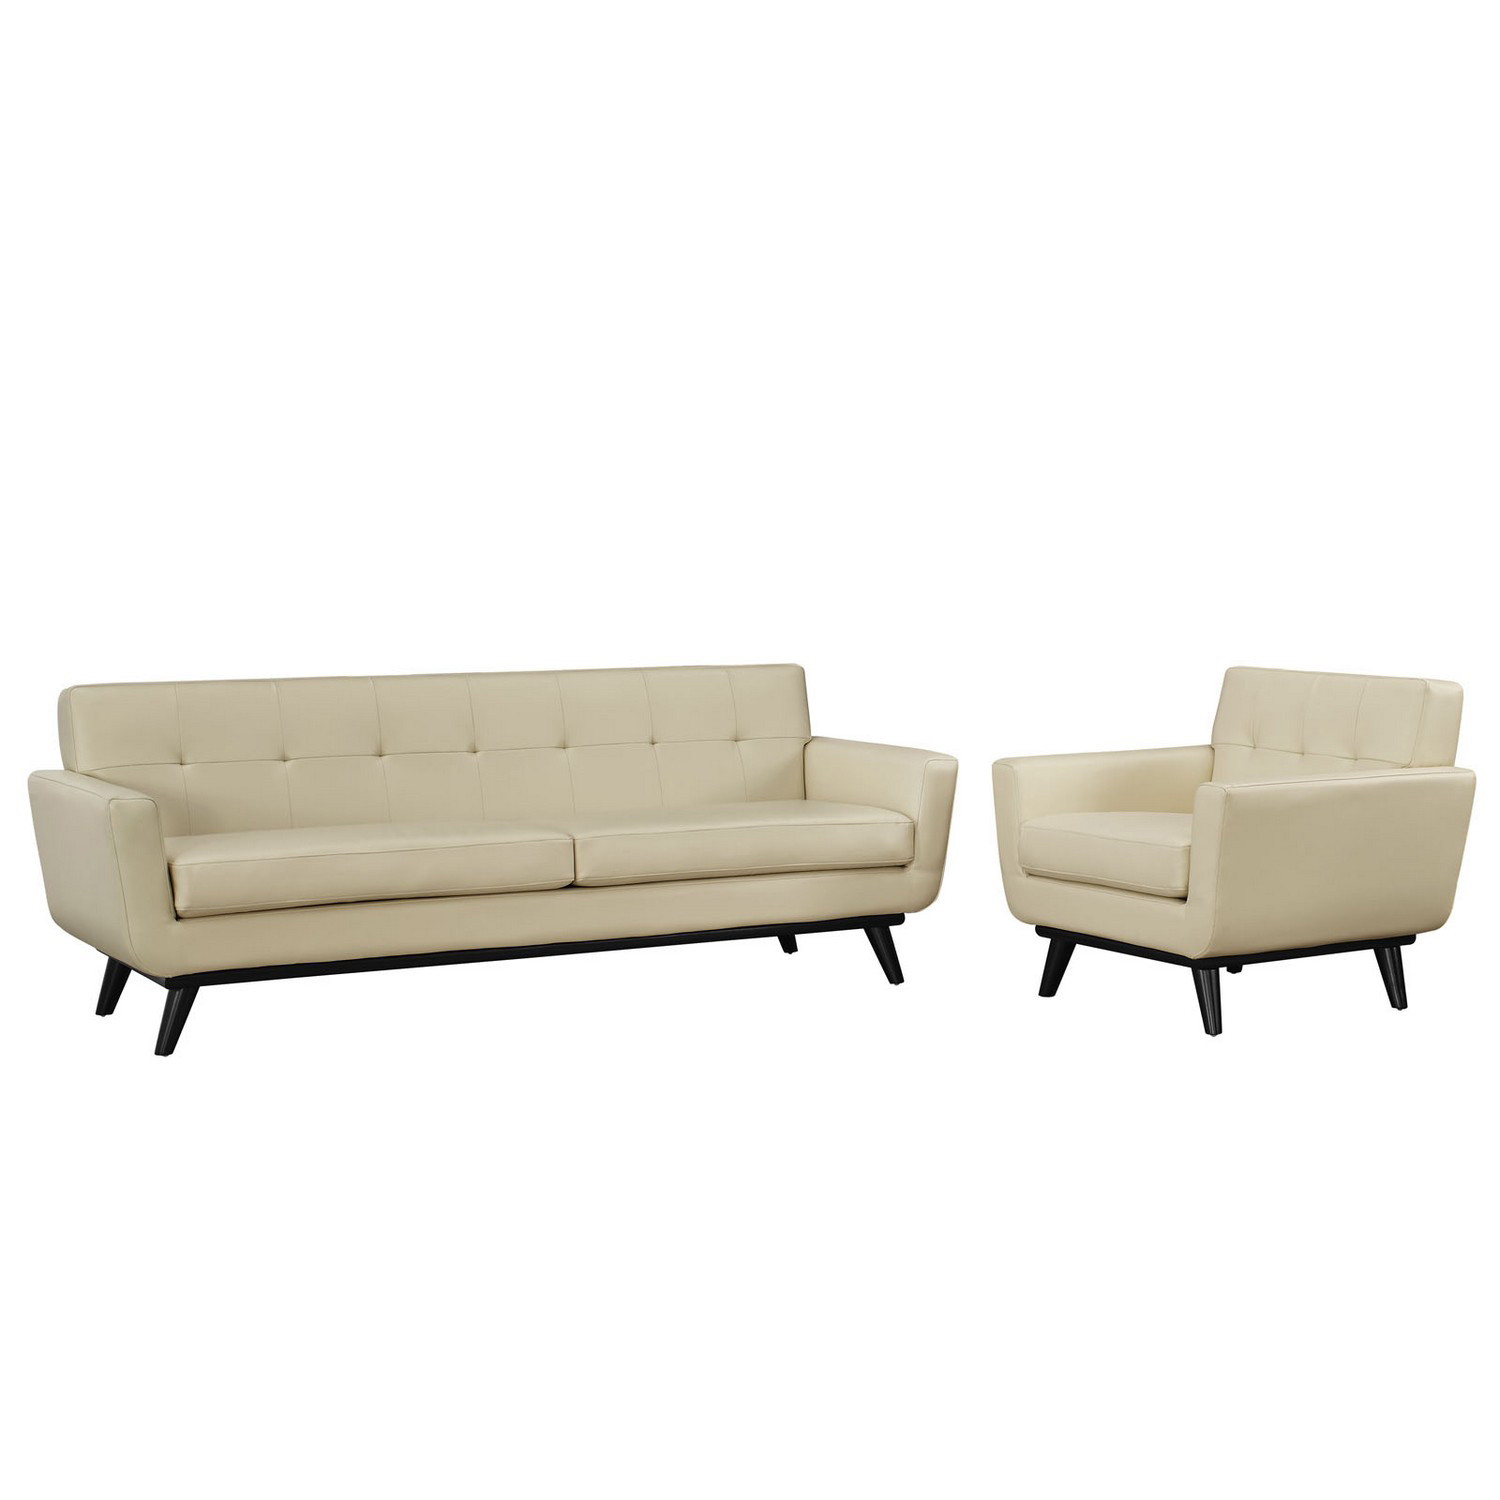 Modway Engage 2 Piece Leather Living Room Set - Beige